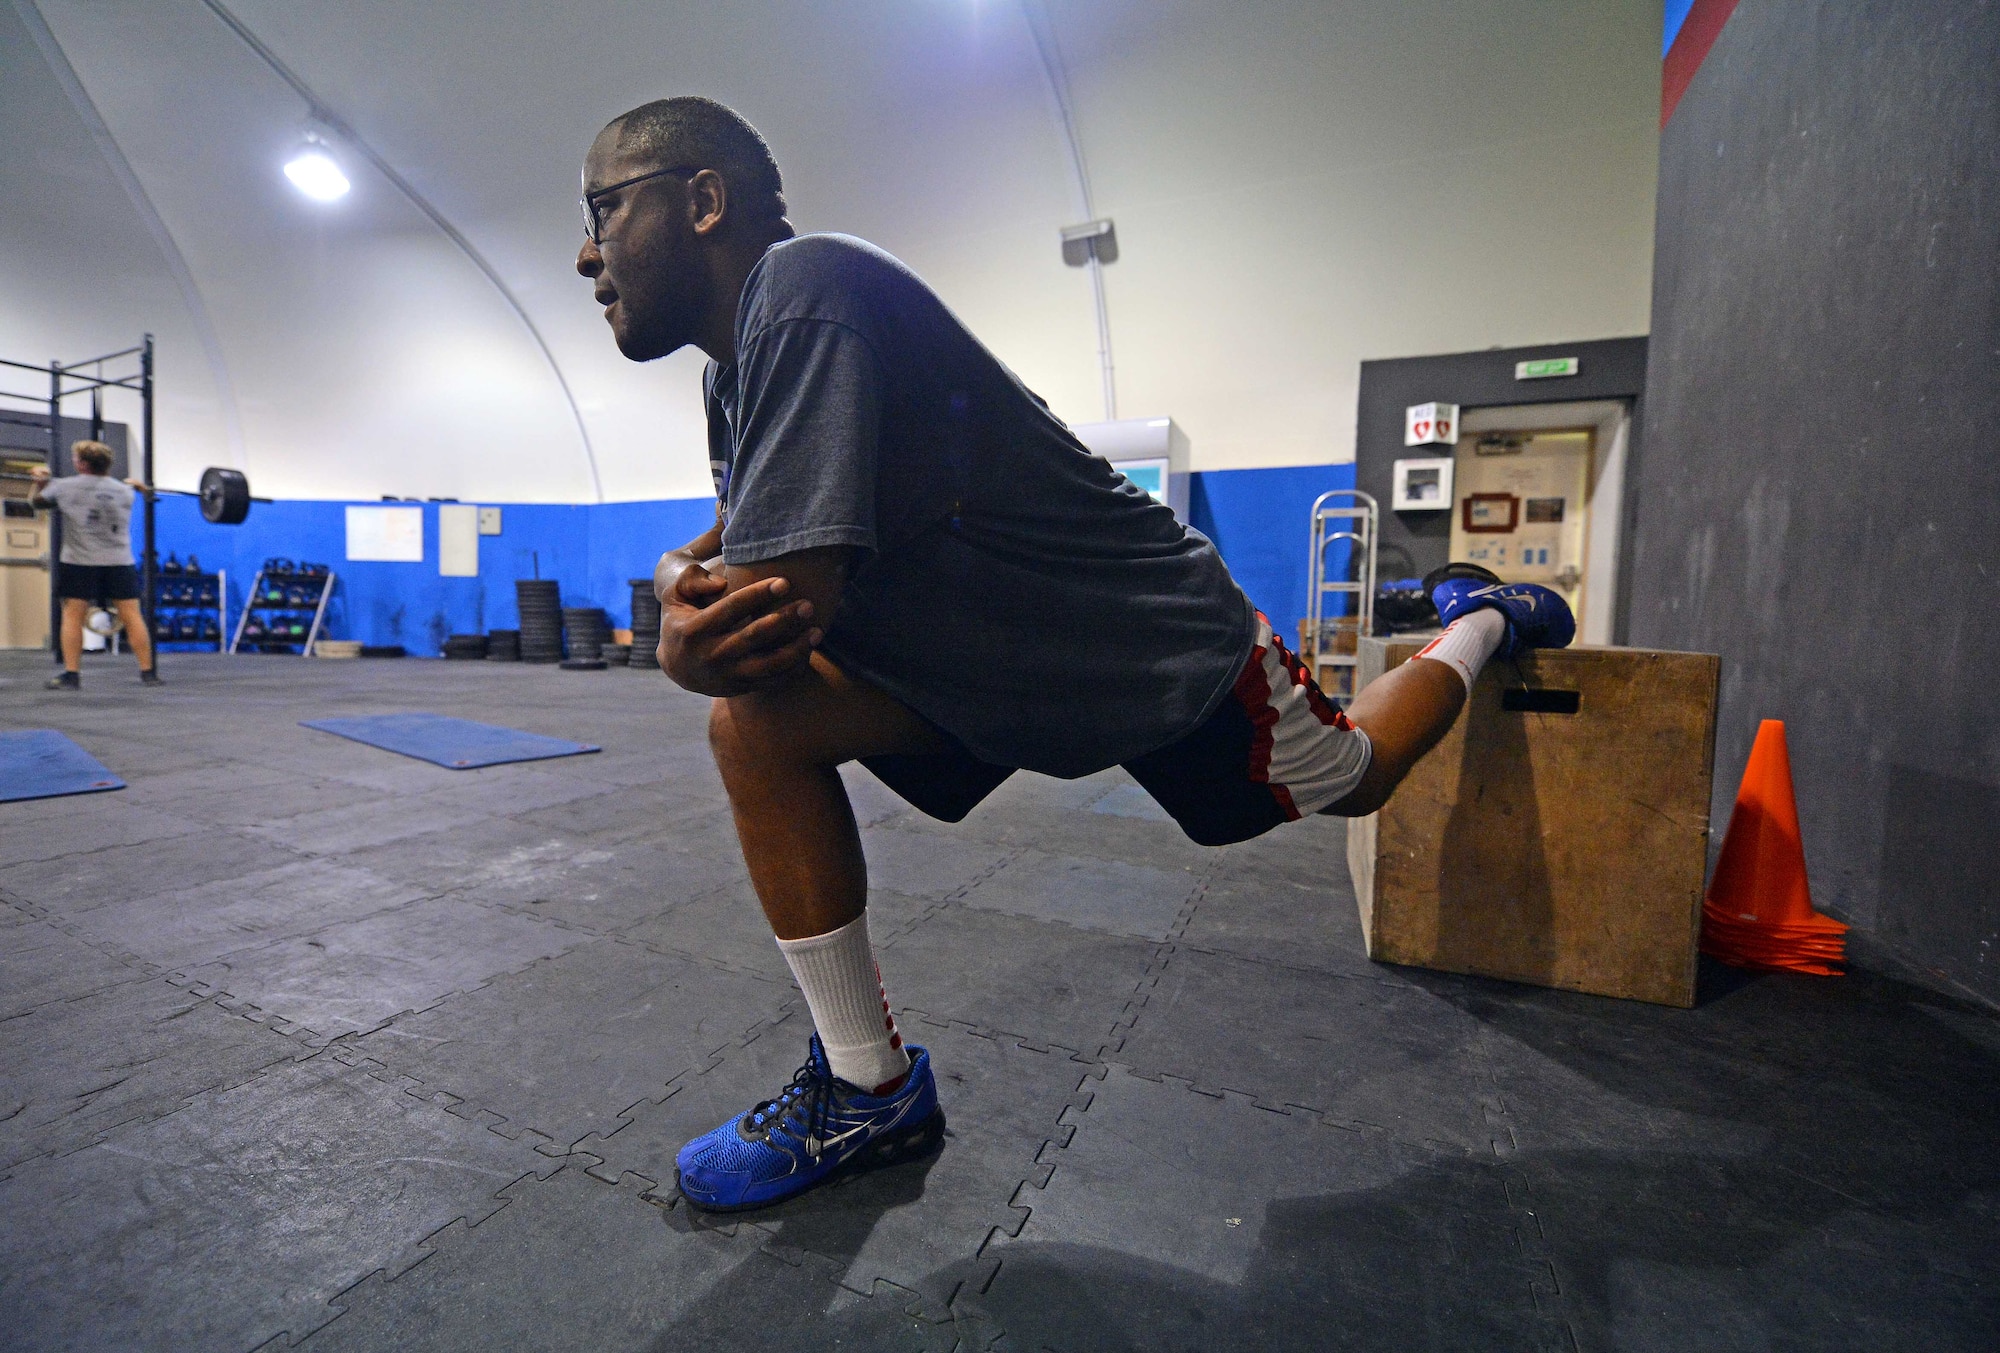 Staff Sgt. Jamey, 380th Expeditionary Security Forces Squadron member, stretches after completing strength and agility exercises at undisclosed location in Southwest Asia Sept. 3, 2015. Jamey is participating in the Physical Therapy Clinic’s strength and agility program to help rehabilitate his knees. (U.S. Air Force photo/Tech. Sgt. Jeff Andrejcik)     